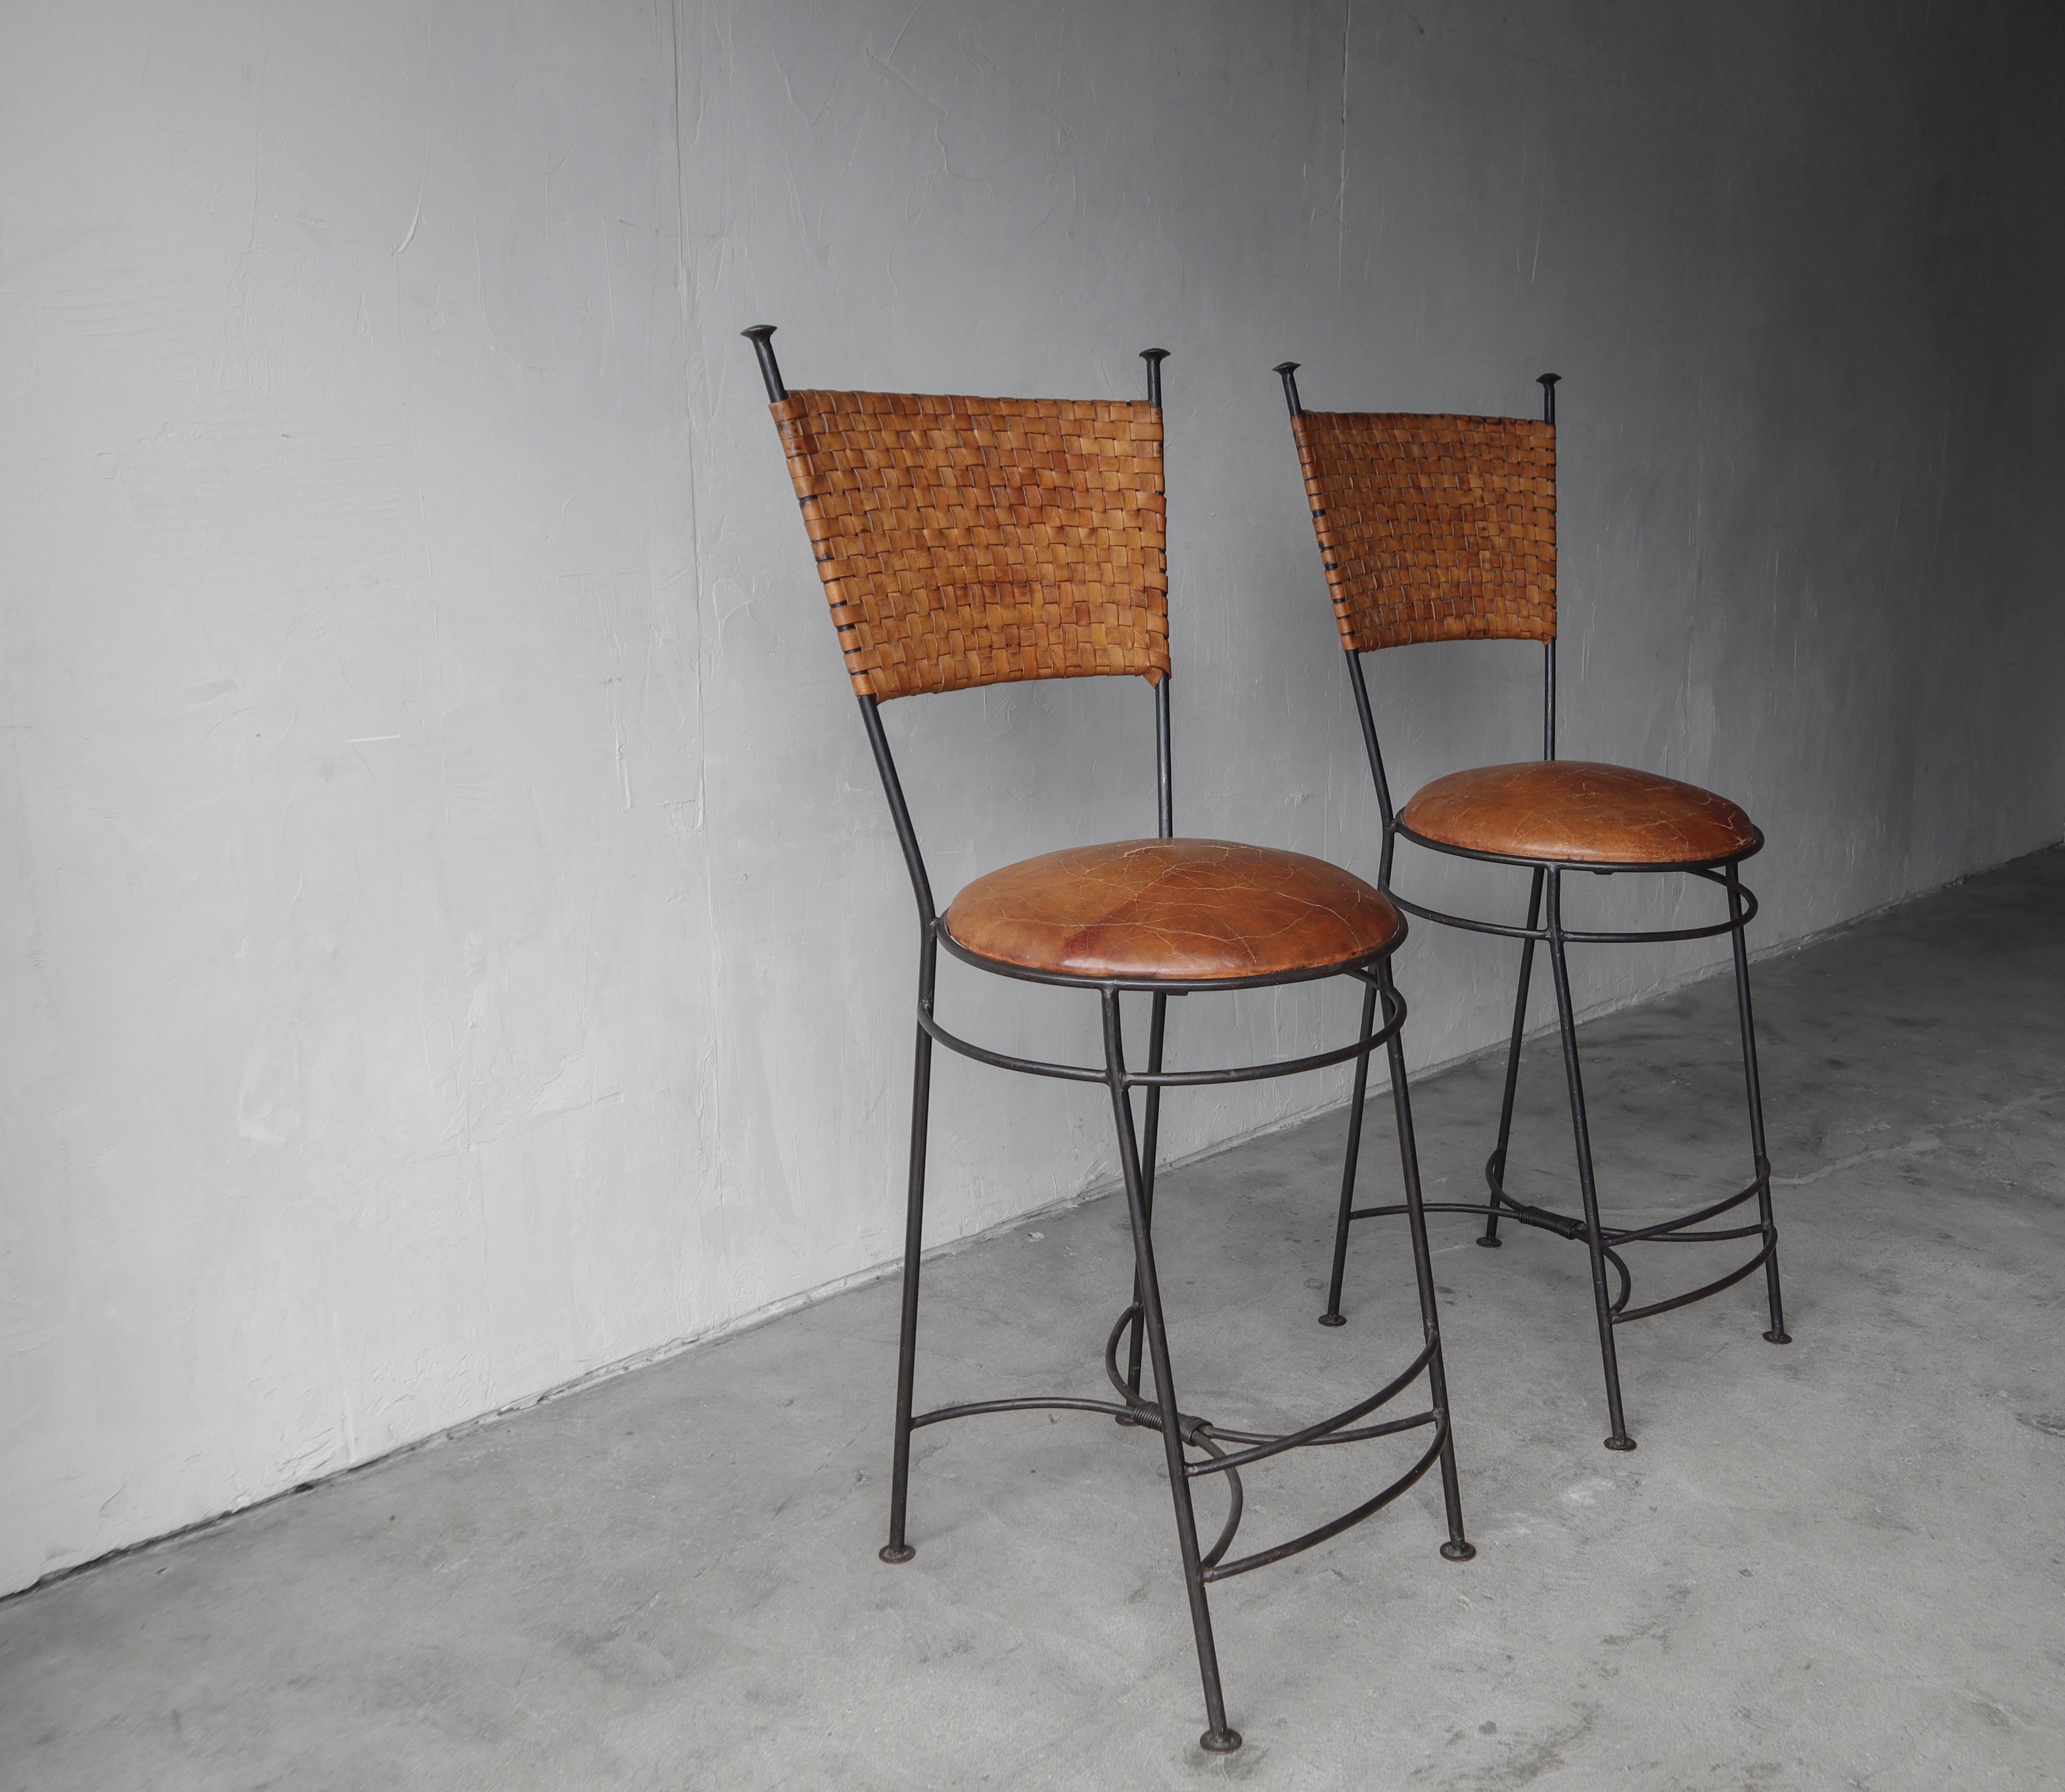 20th Century Oversized Vintage Woven Leather and Iron Bar Stools - A Pair For Sale